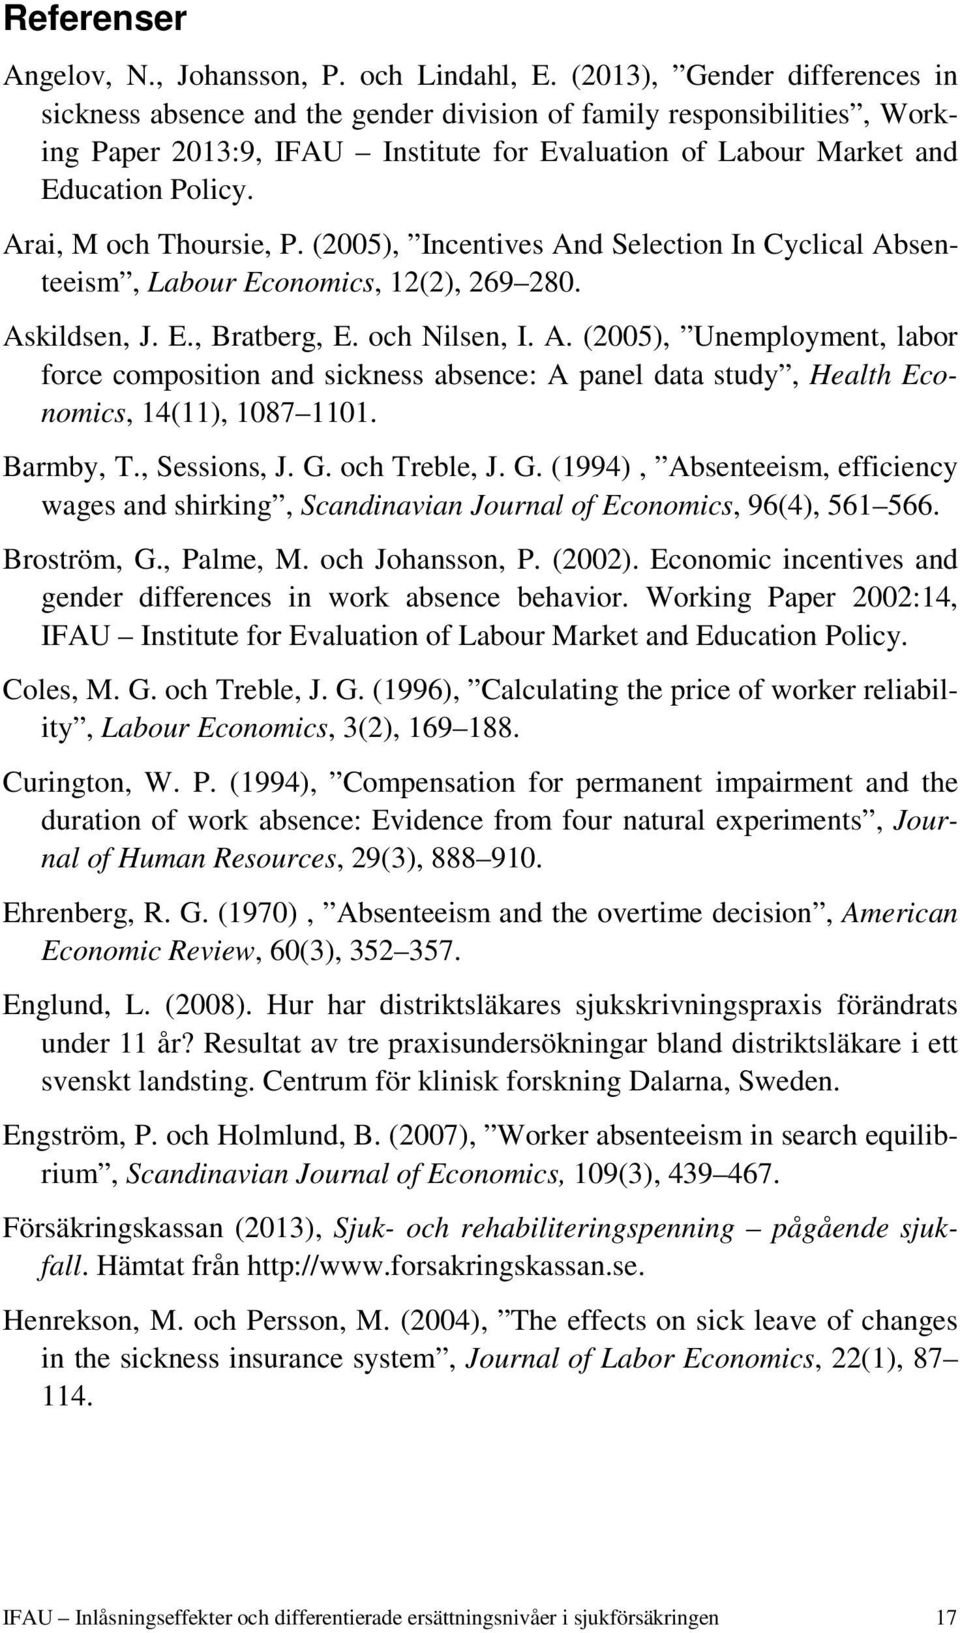 Arai, M och Thoursie, P. (2005), Incentives And Selection In Cyclical Absenteeism, Labour Economics, 12(2), 269 280. Askildsen, J. E., Bratberg, E. och Nilsen, I. A. (2005), Unemployment, labor force composition and sickness absence: A panel data study, Health Economics, 14(11), 1087 1101.